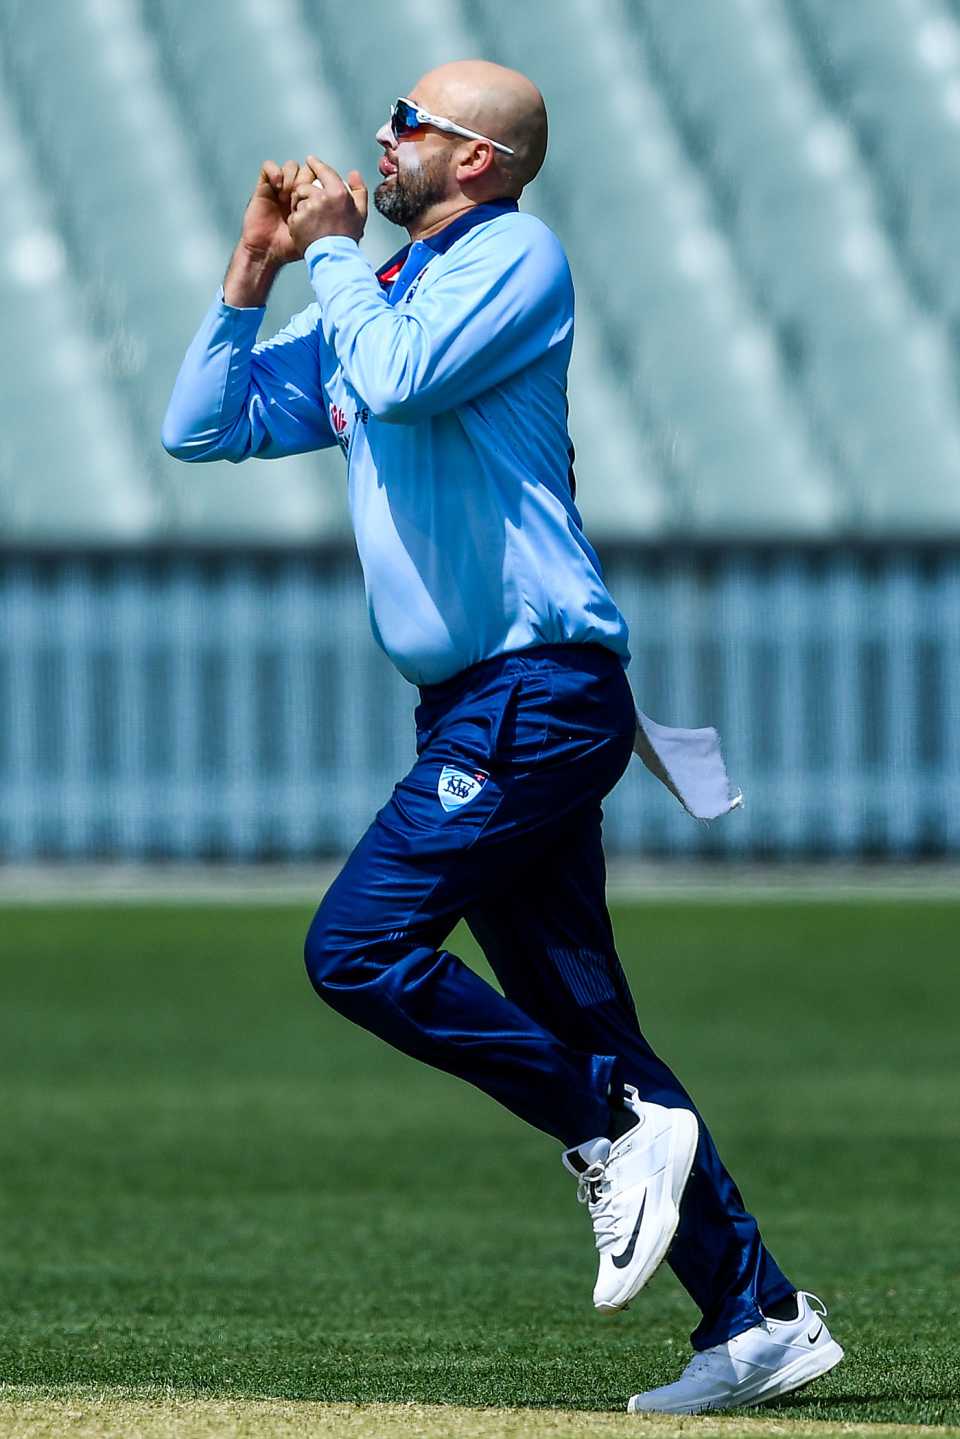 Nathan Lyon was back in state action after his calf injury